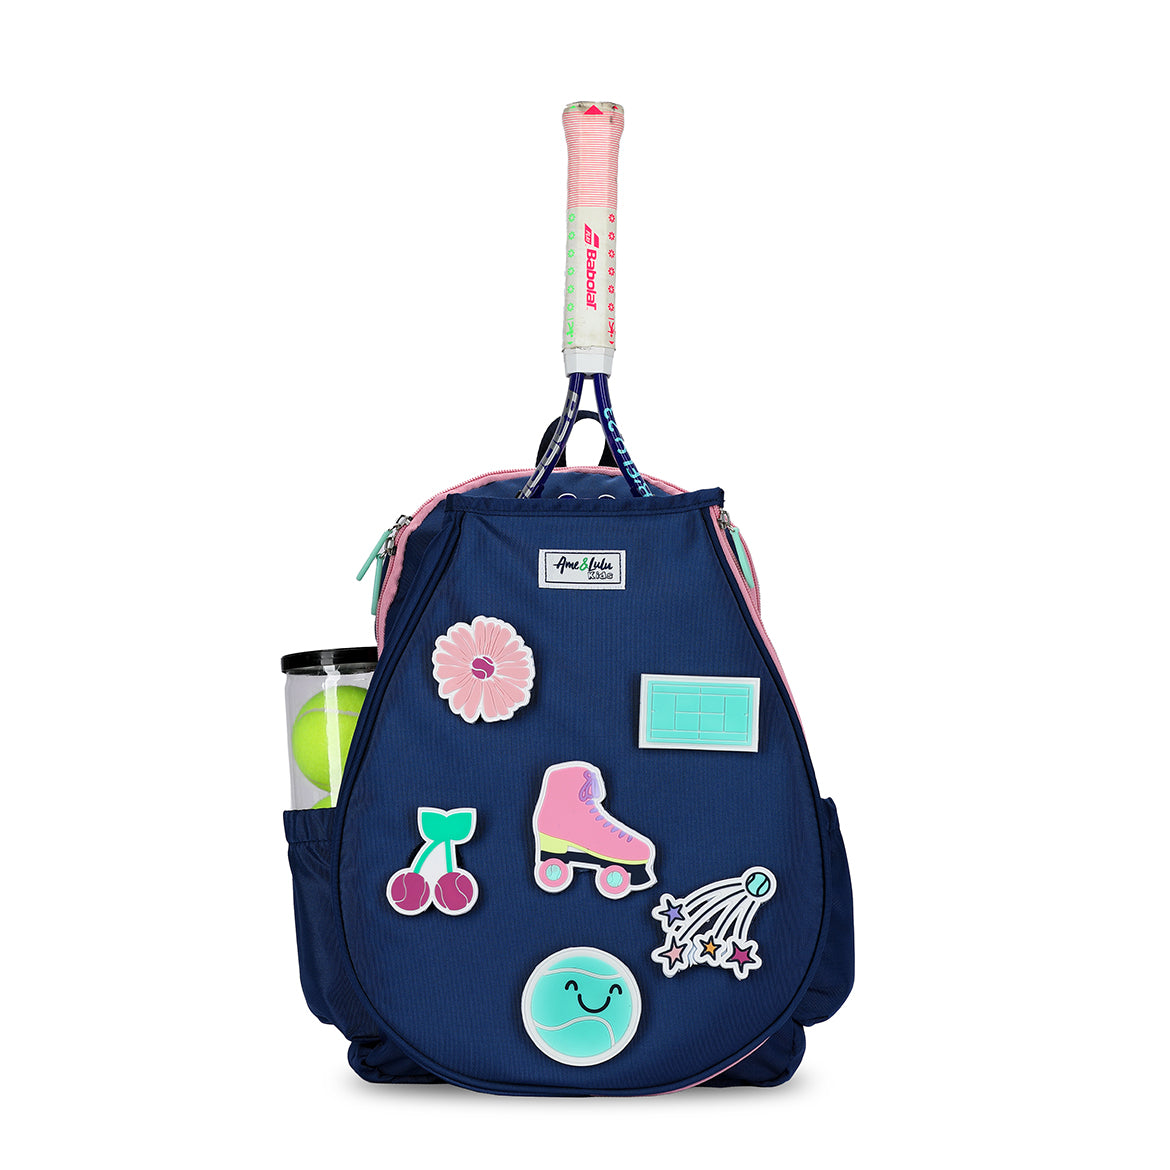 Front view of navy kids tennis backpack with removeable patches. Patches shown are pink flower, cherries, roller skate, tennis court, smiling tennis ball and shooting star tennis ball.